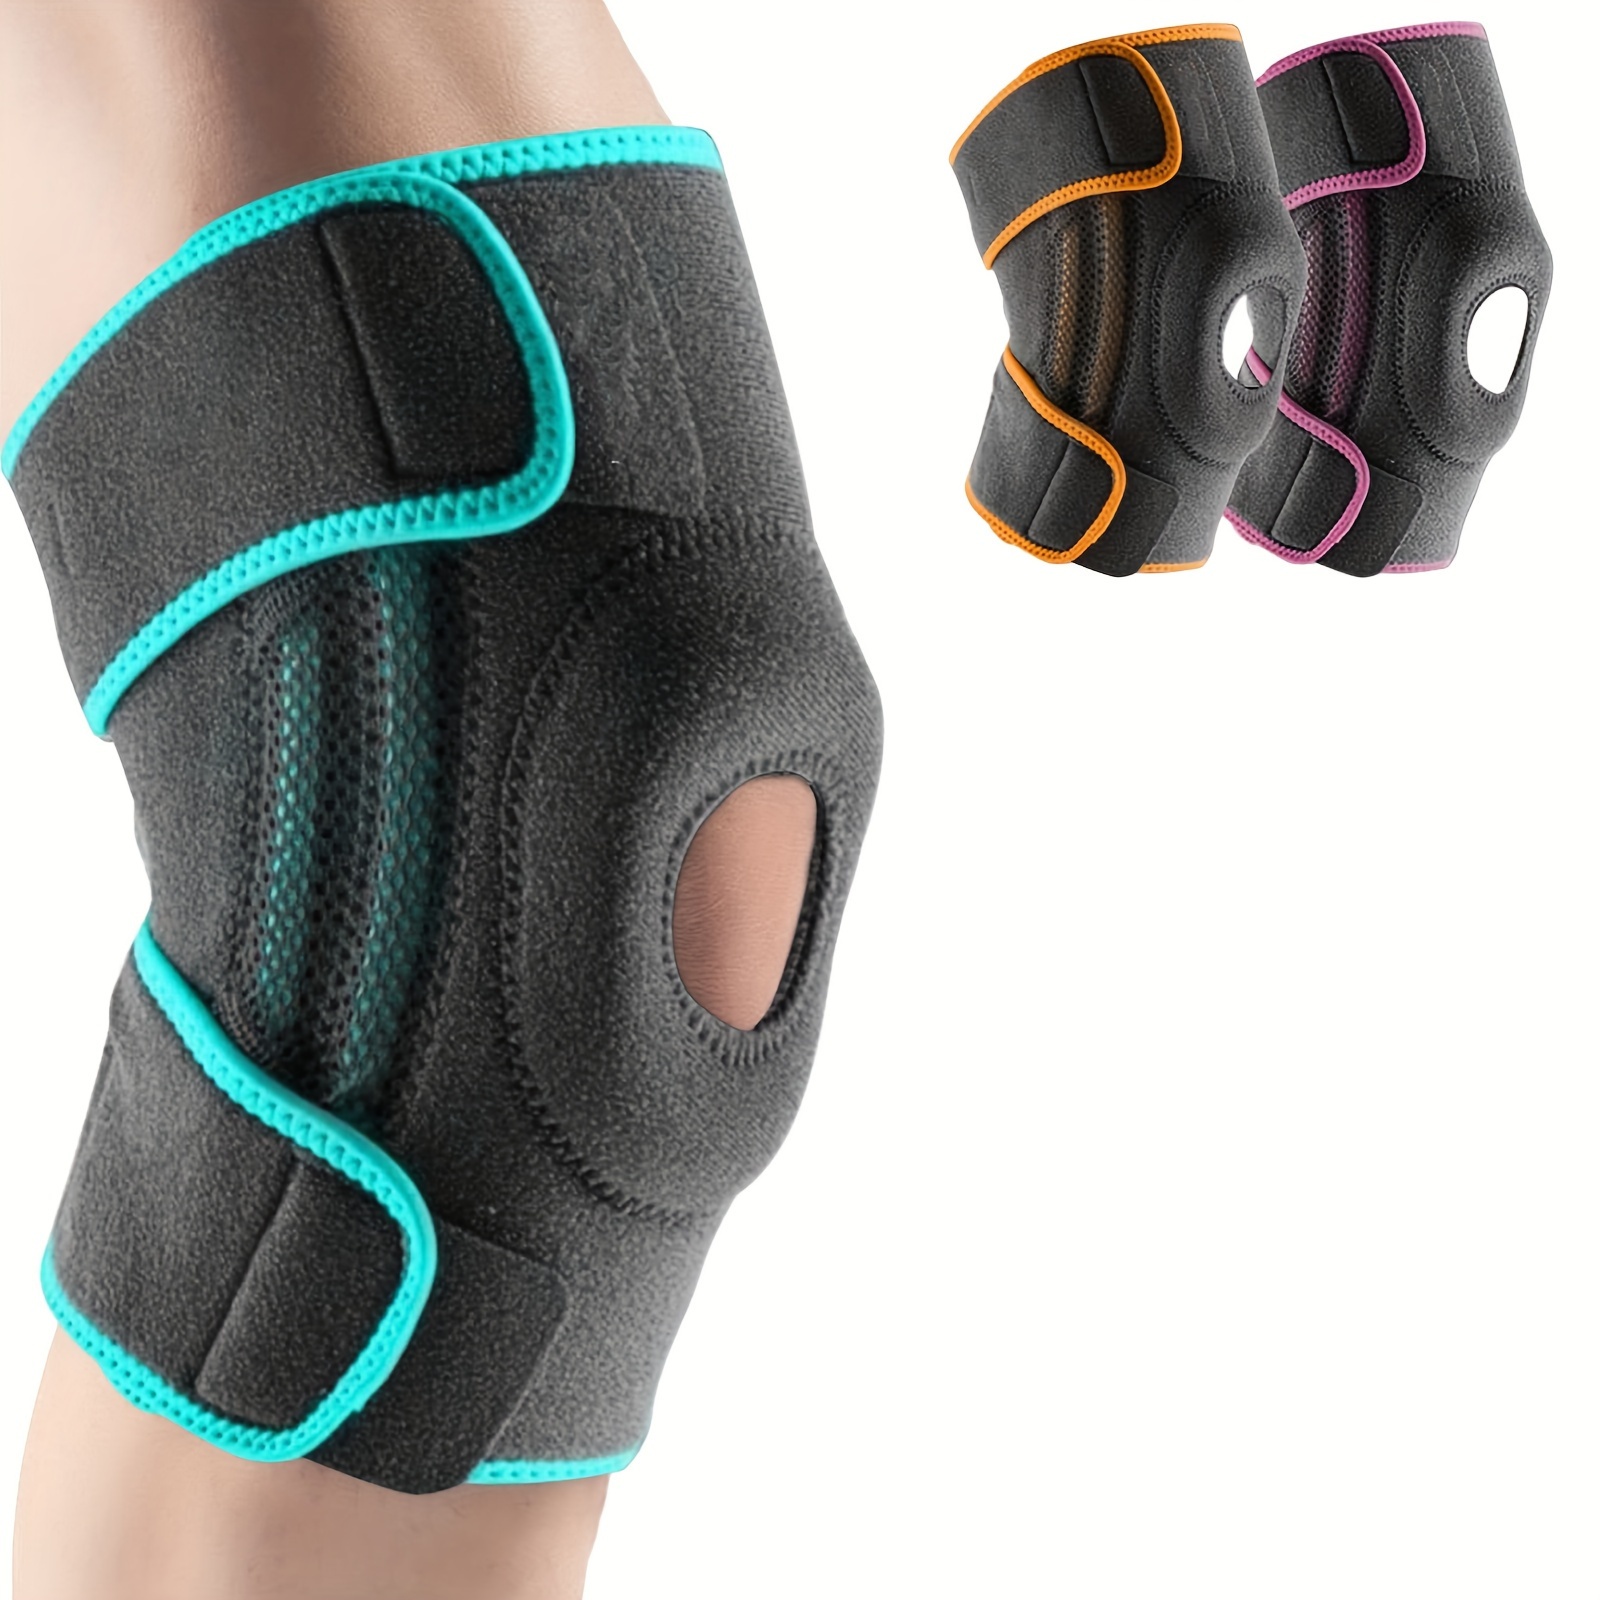 Professional Knee Brace,Knee Compression Sleeve Support for Men Women with Patella  Gel Pads & Side Stabilizers,Medical Grade Knee Pads for Running,Meniscus  Tear,ACL,Arthritis,Joint Pain Relief, gray